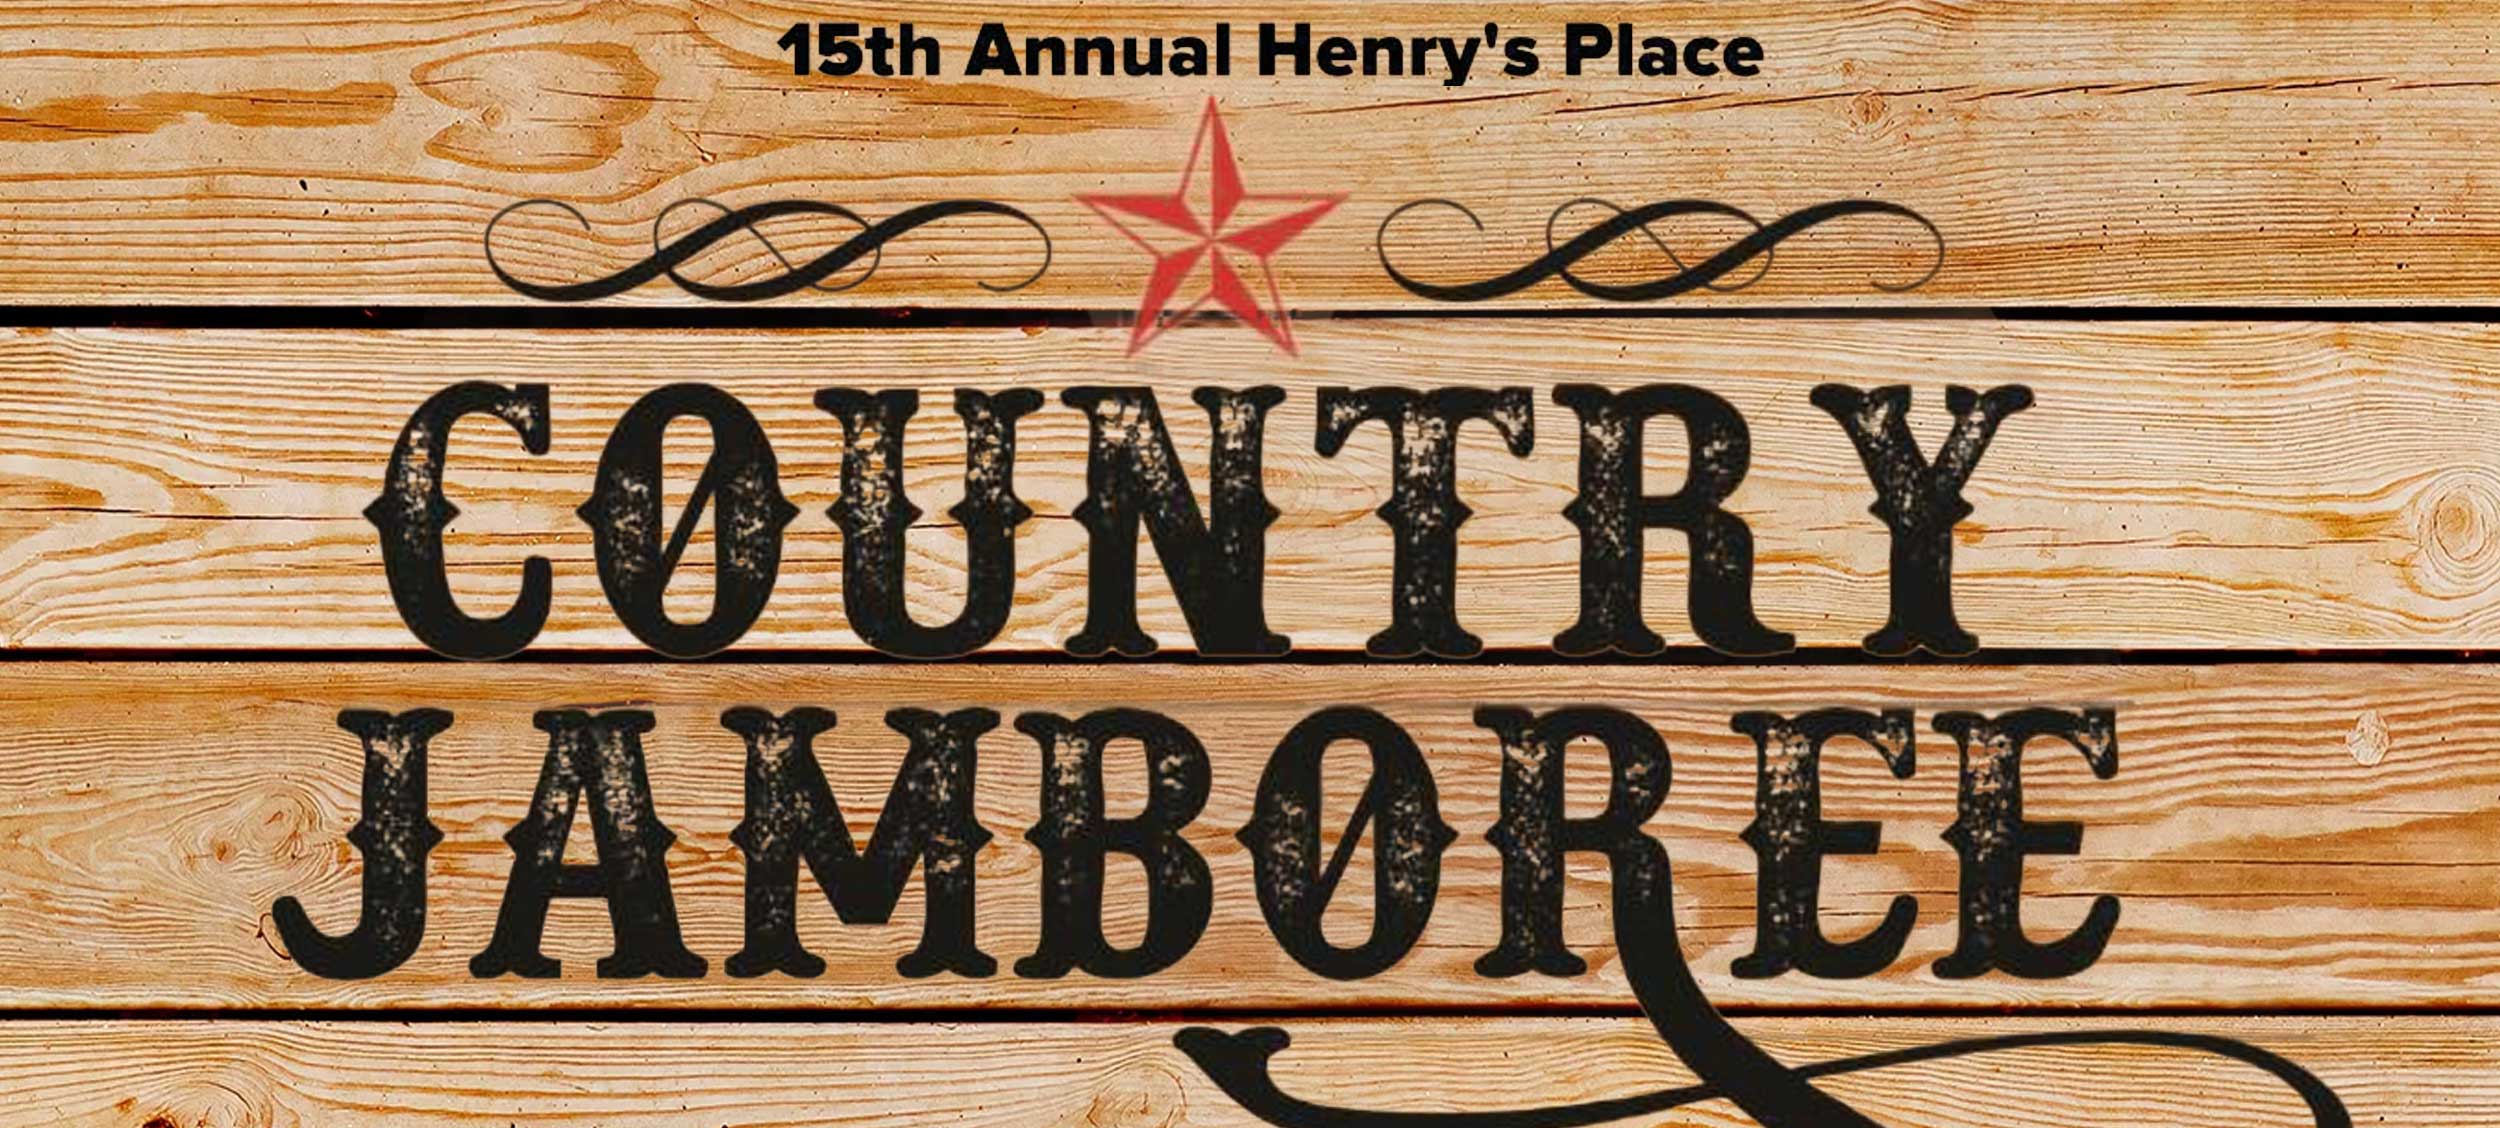 We Came, We Saw, We Ye-hawed: Henry’s Place Country Jamboree 2021